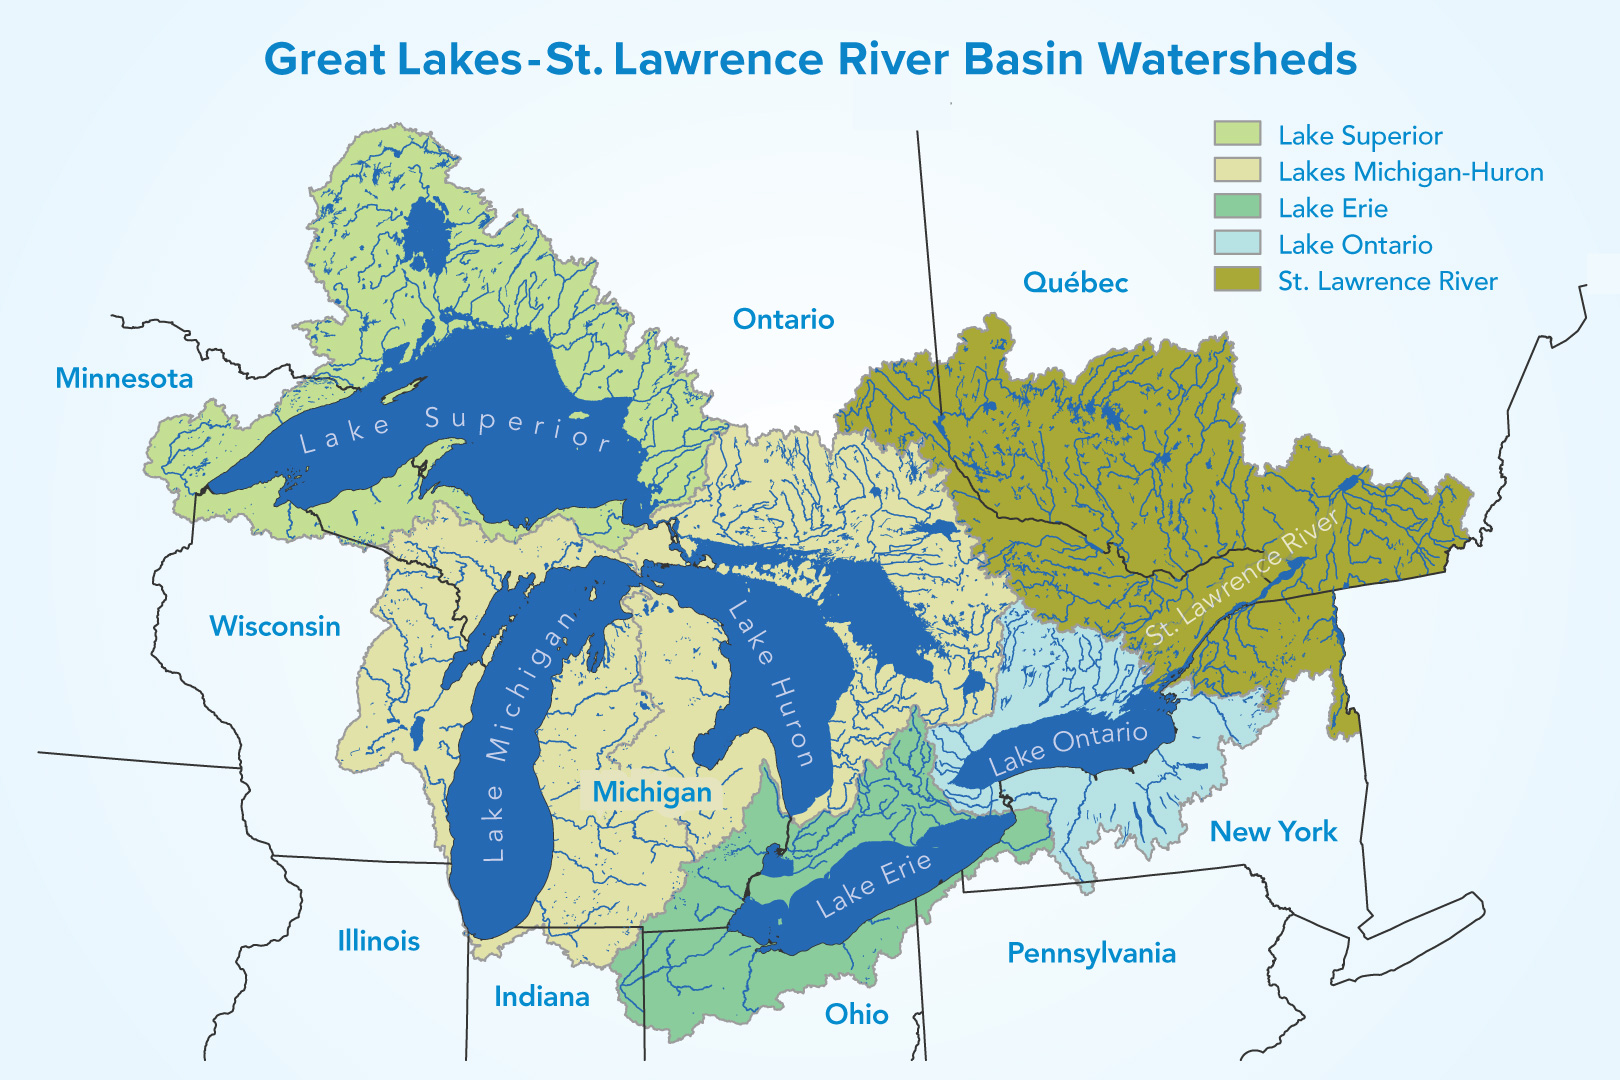 Great Lakes-St. Lawrence River Basin Watersheds